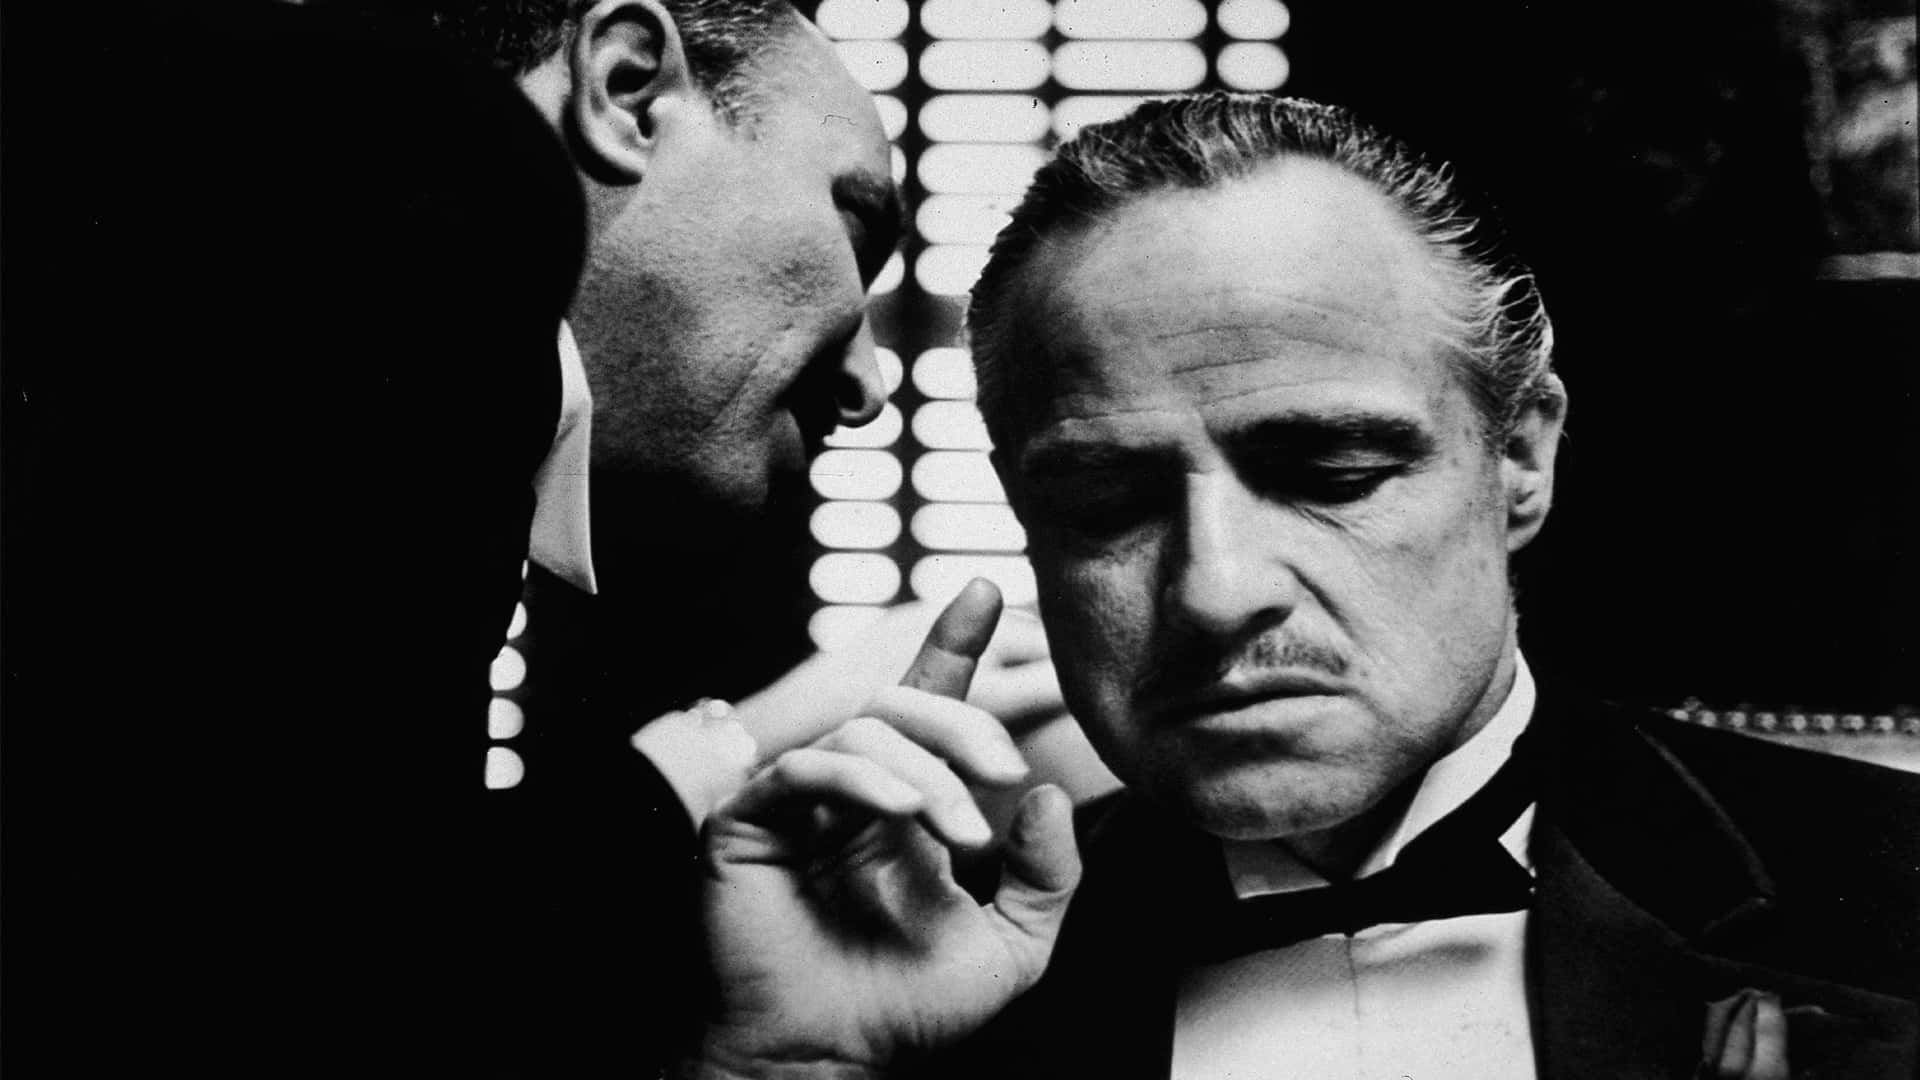 The Godfather - A Black And White Photo Of Two Men